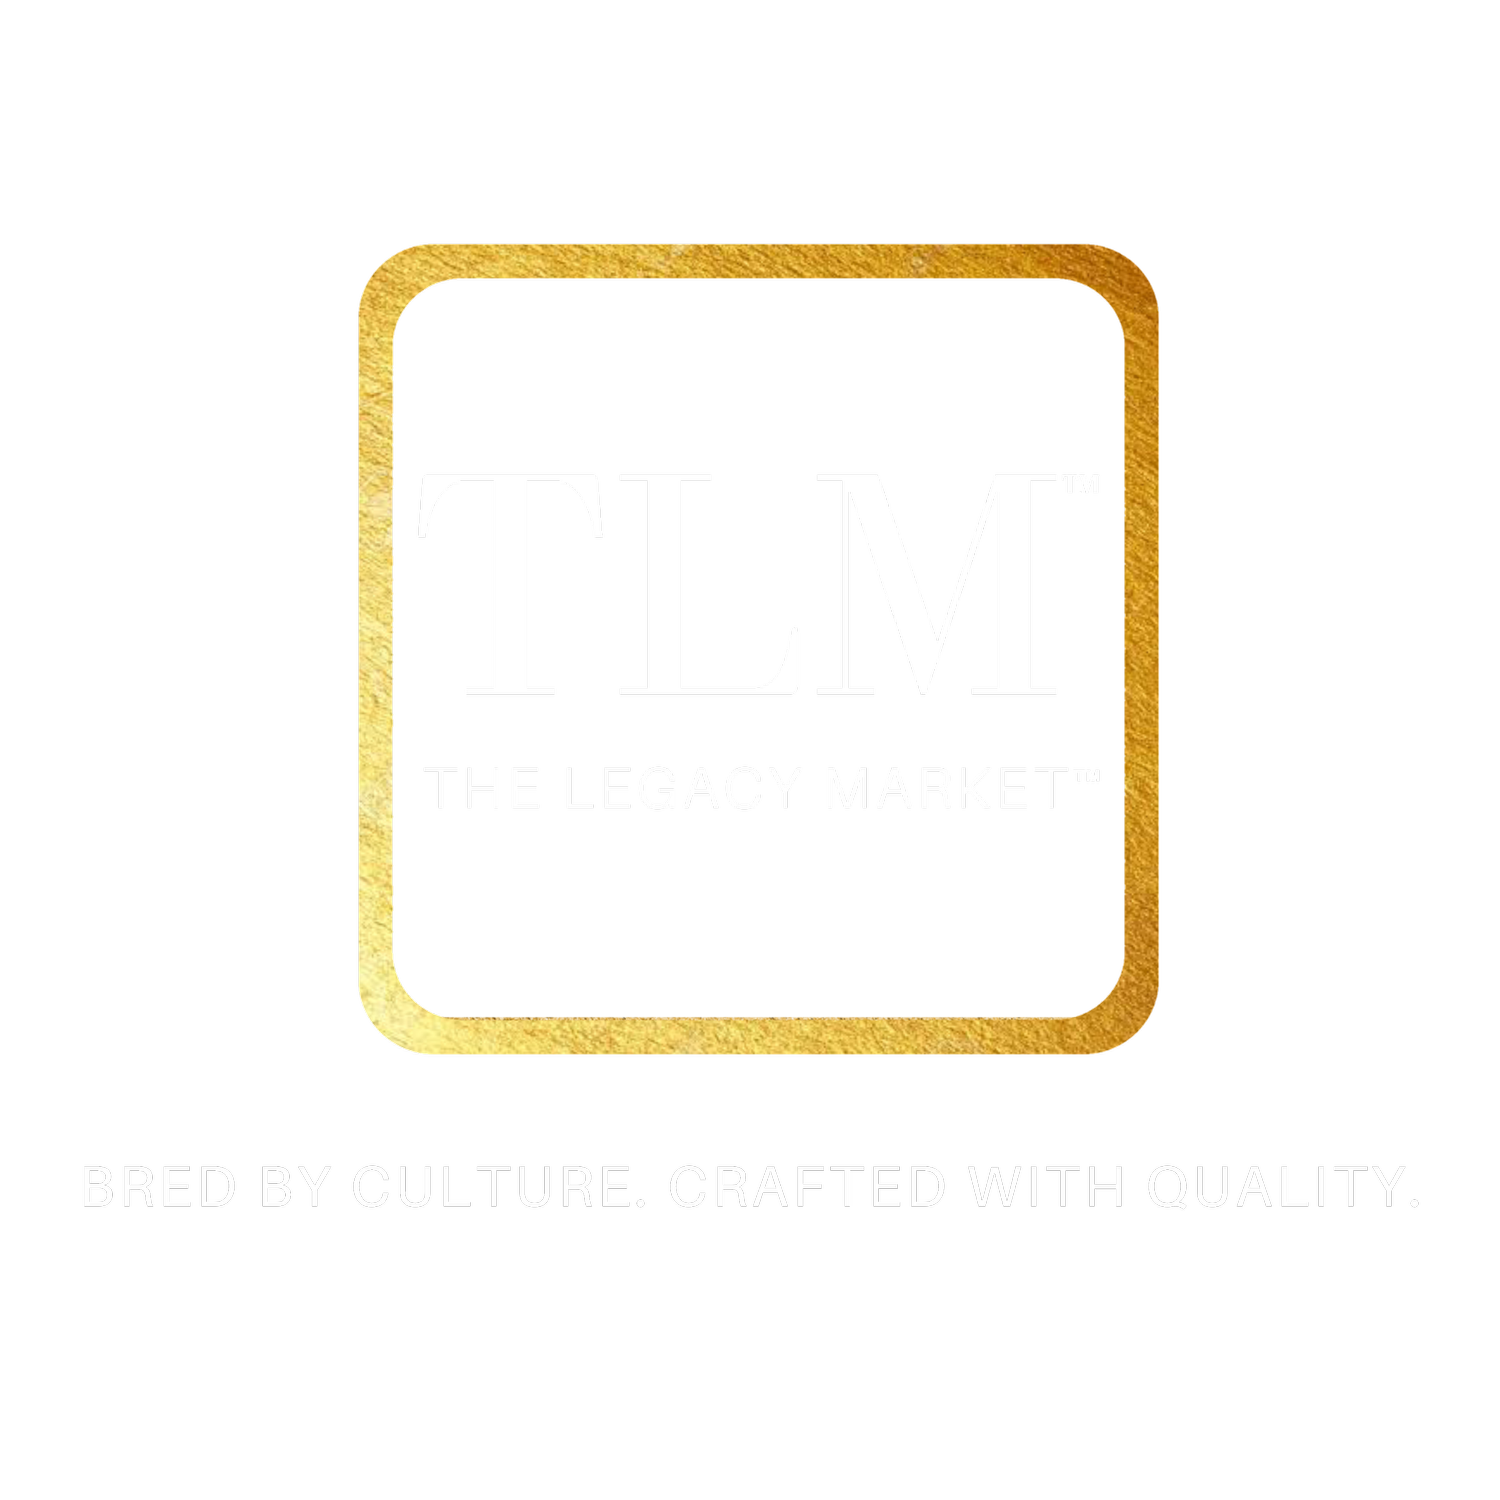 The Legacy Market™